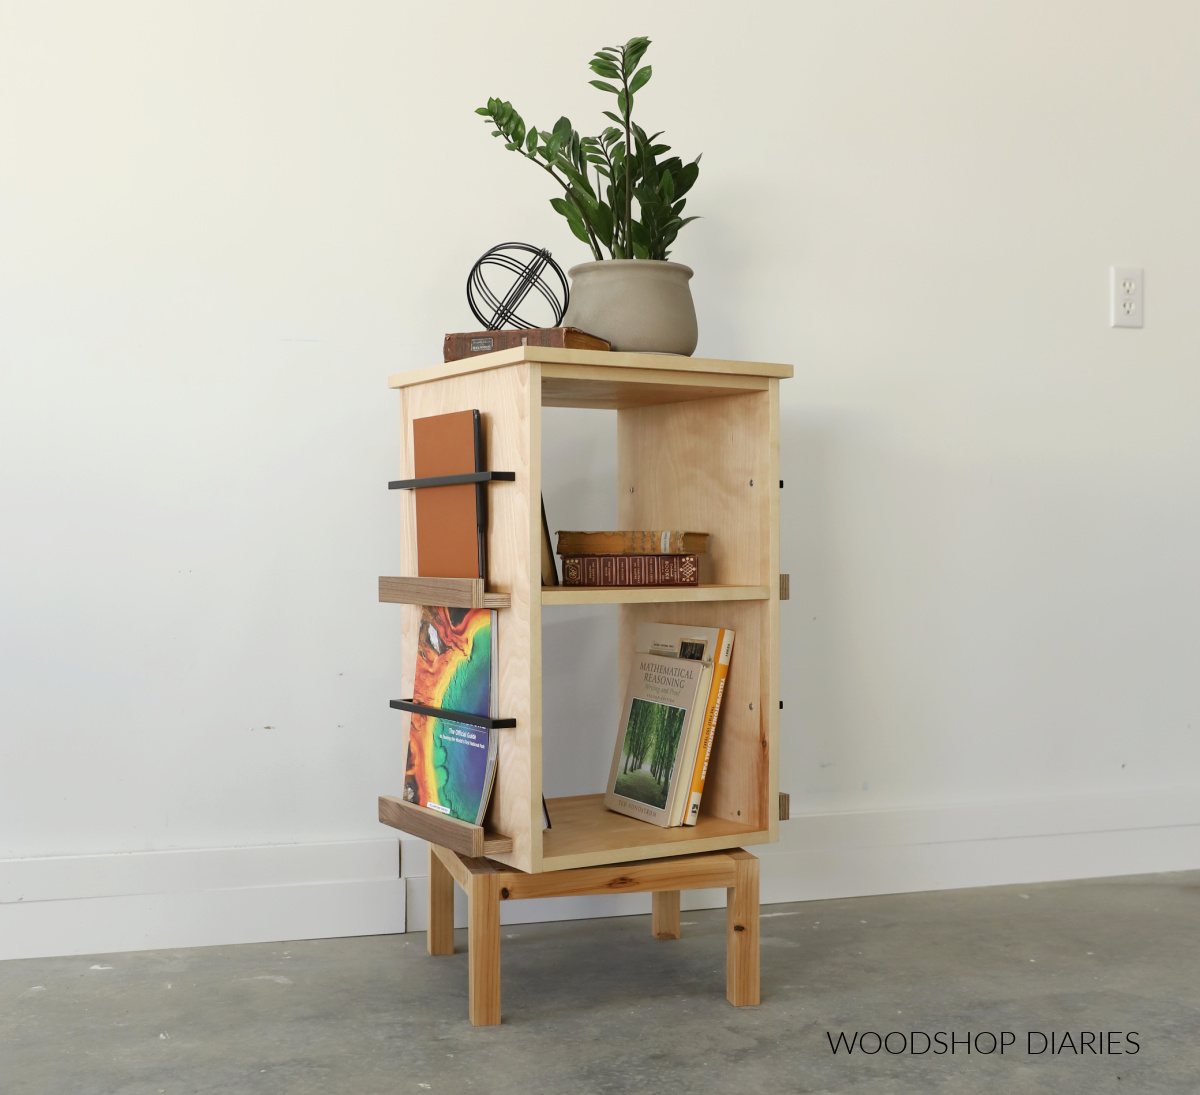 4 sided rotating bookshelf with magazine ledges on sides and open cubbies in center